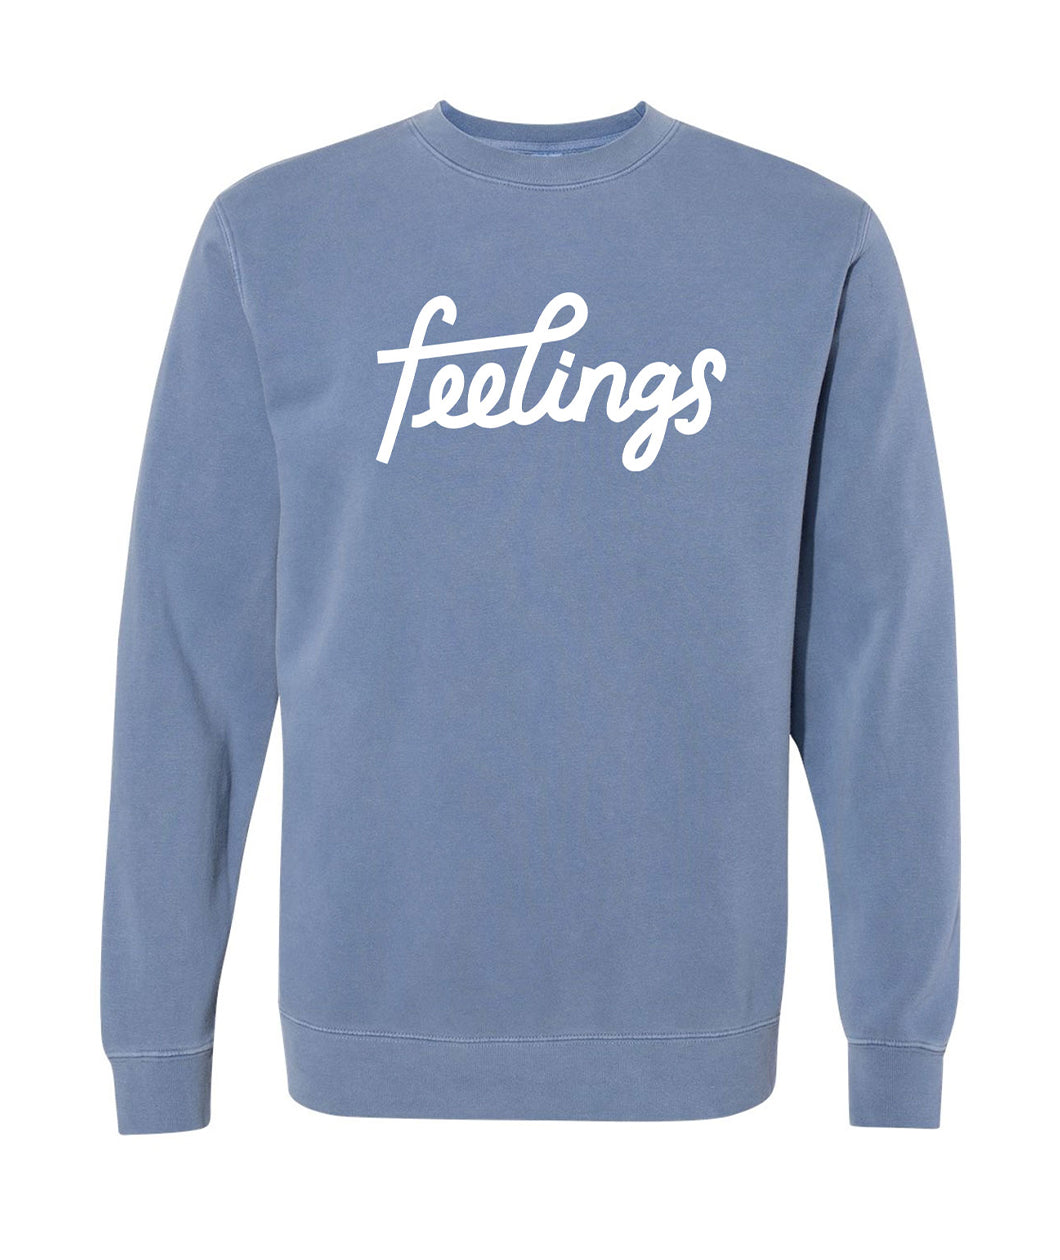 Steel blue crewneck sweater with “feelings” in white cursive font across the chest. The “f” and “l” are connected together - from Iz Harris